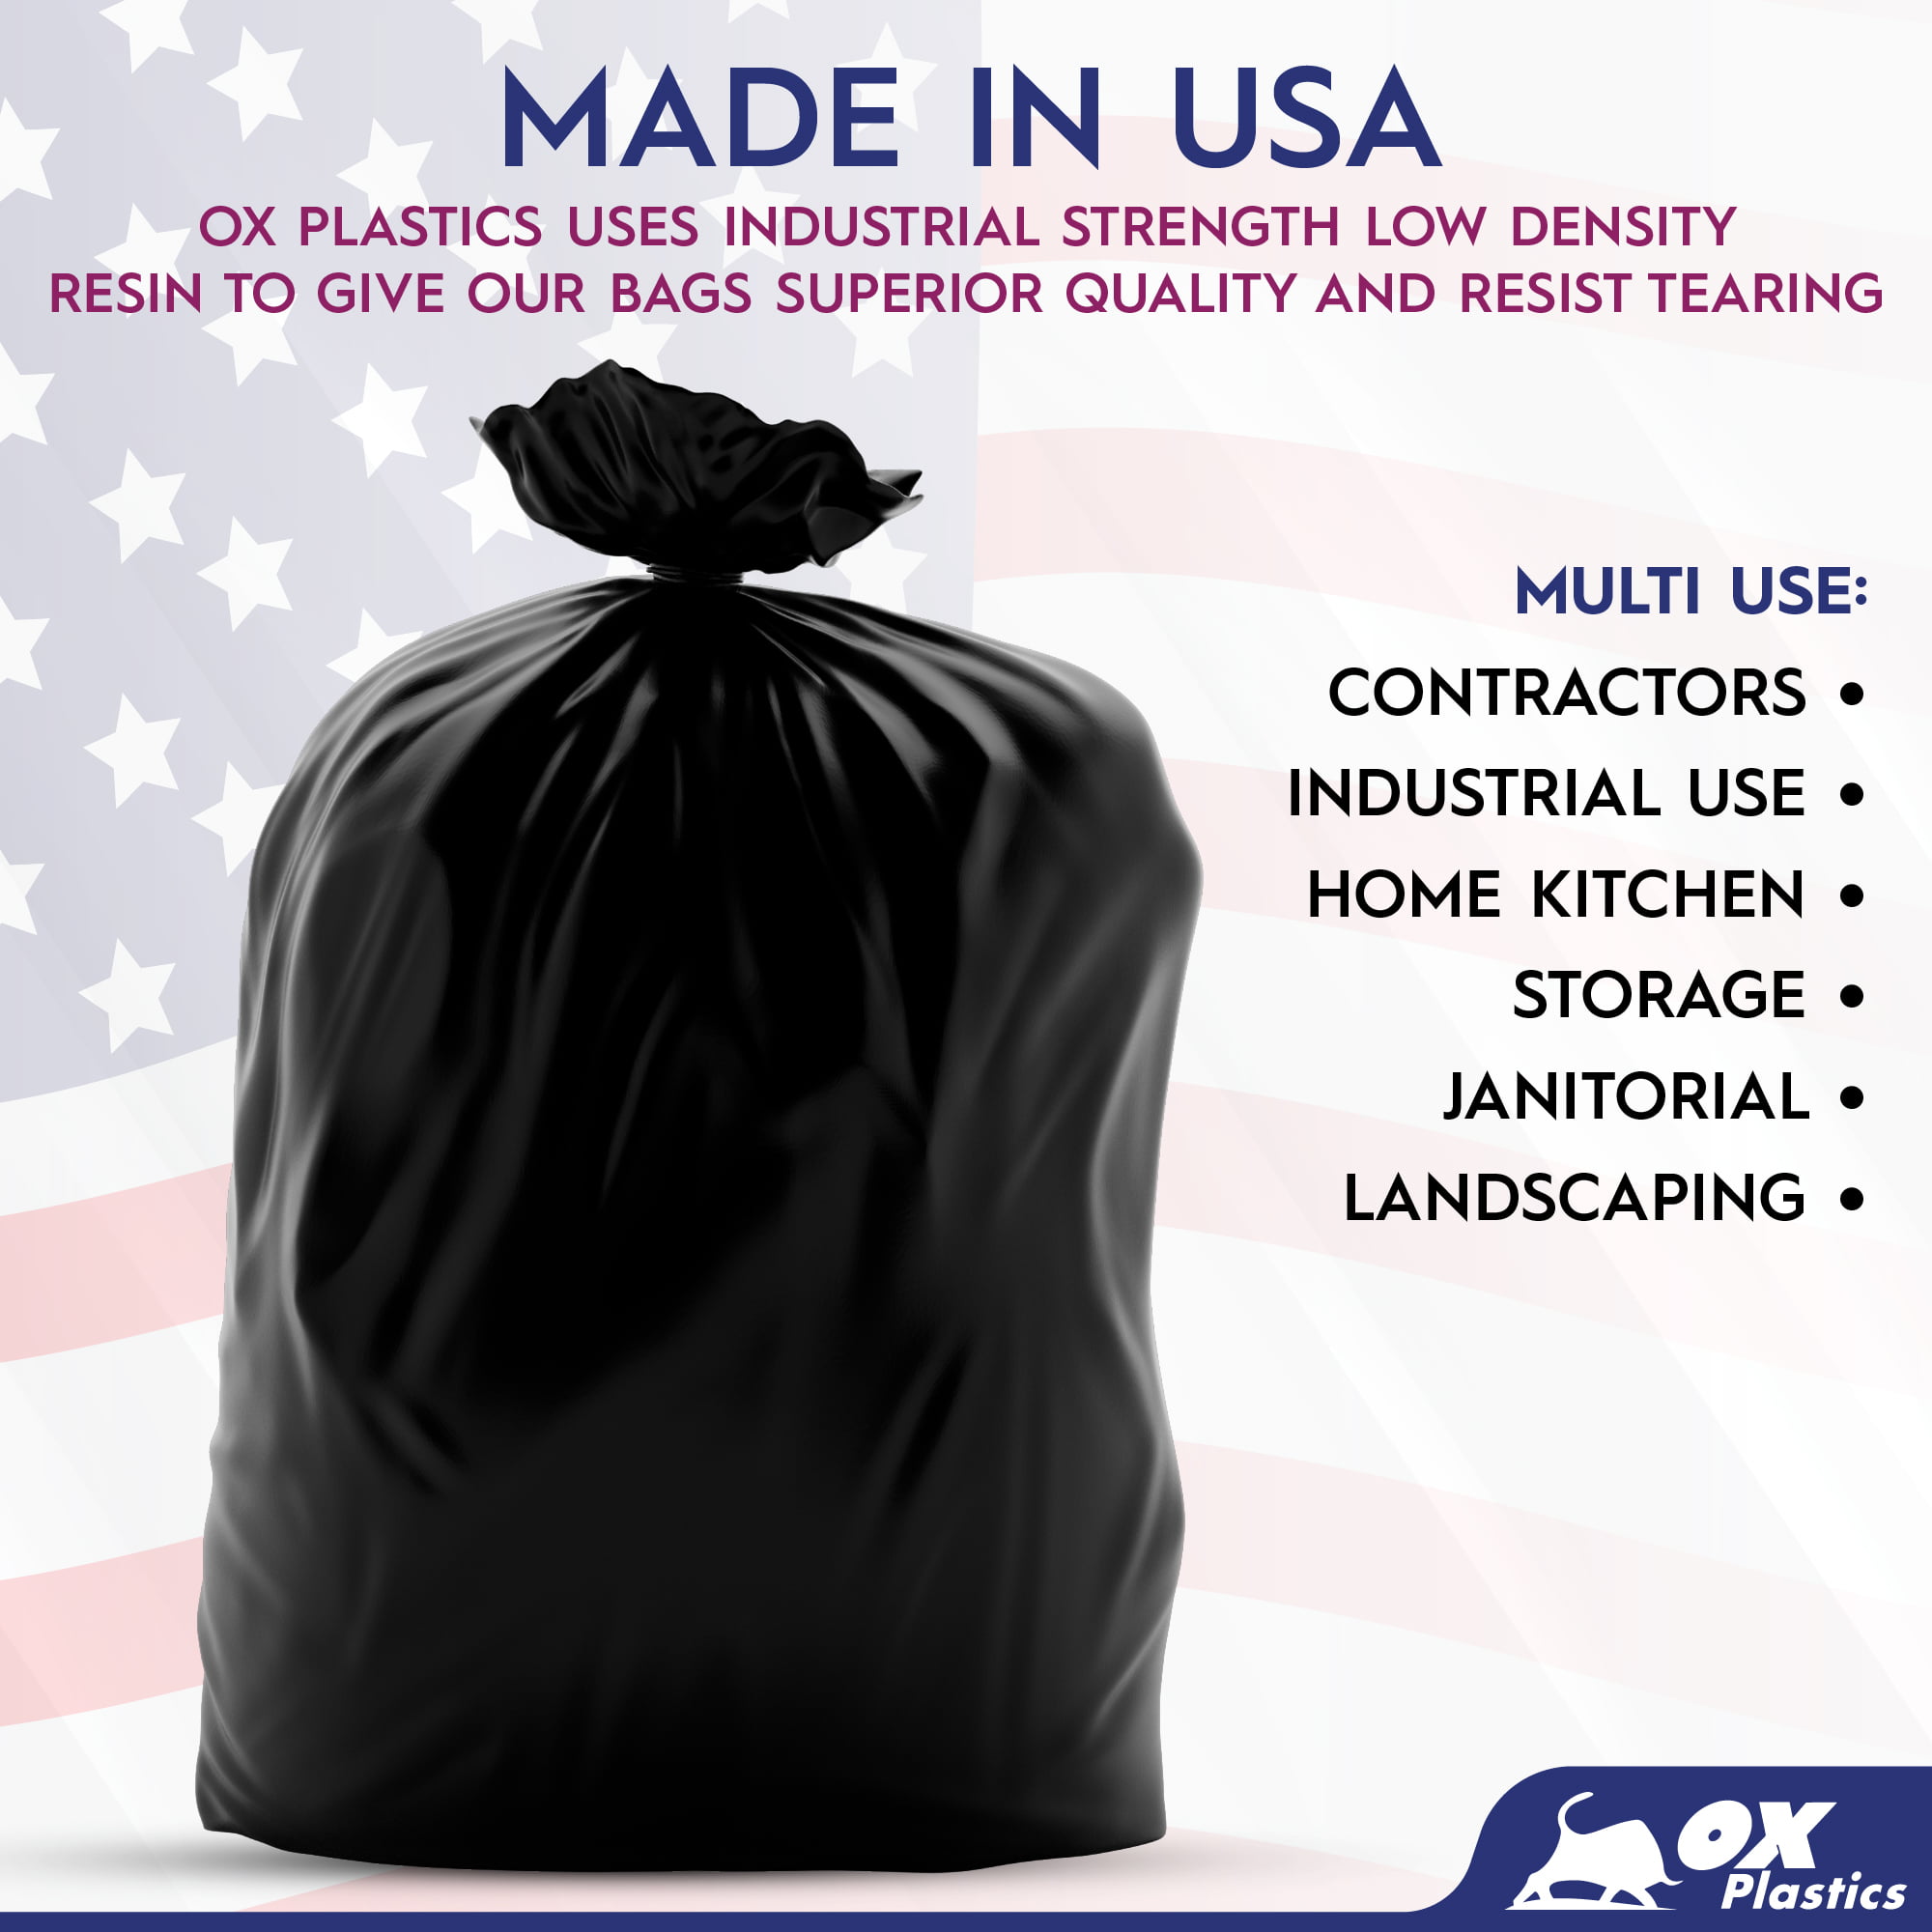 Tasker 55 Gallon Trash Bags (Value 50 Bags w/Ties) Extra Large Industrial  Trash Bags 55 Gallon, Lawn and Leaf Bags, Extra Large Outdoor Contractor